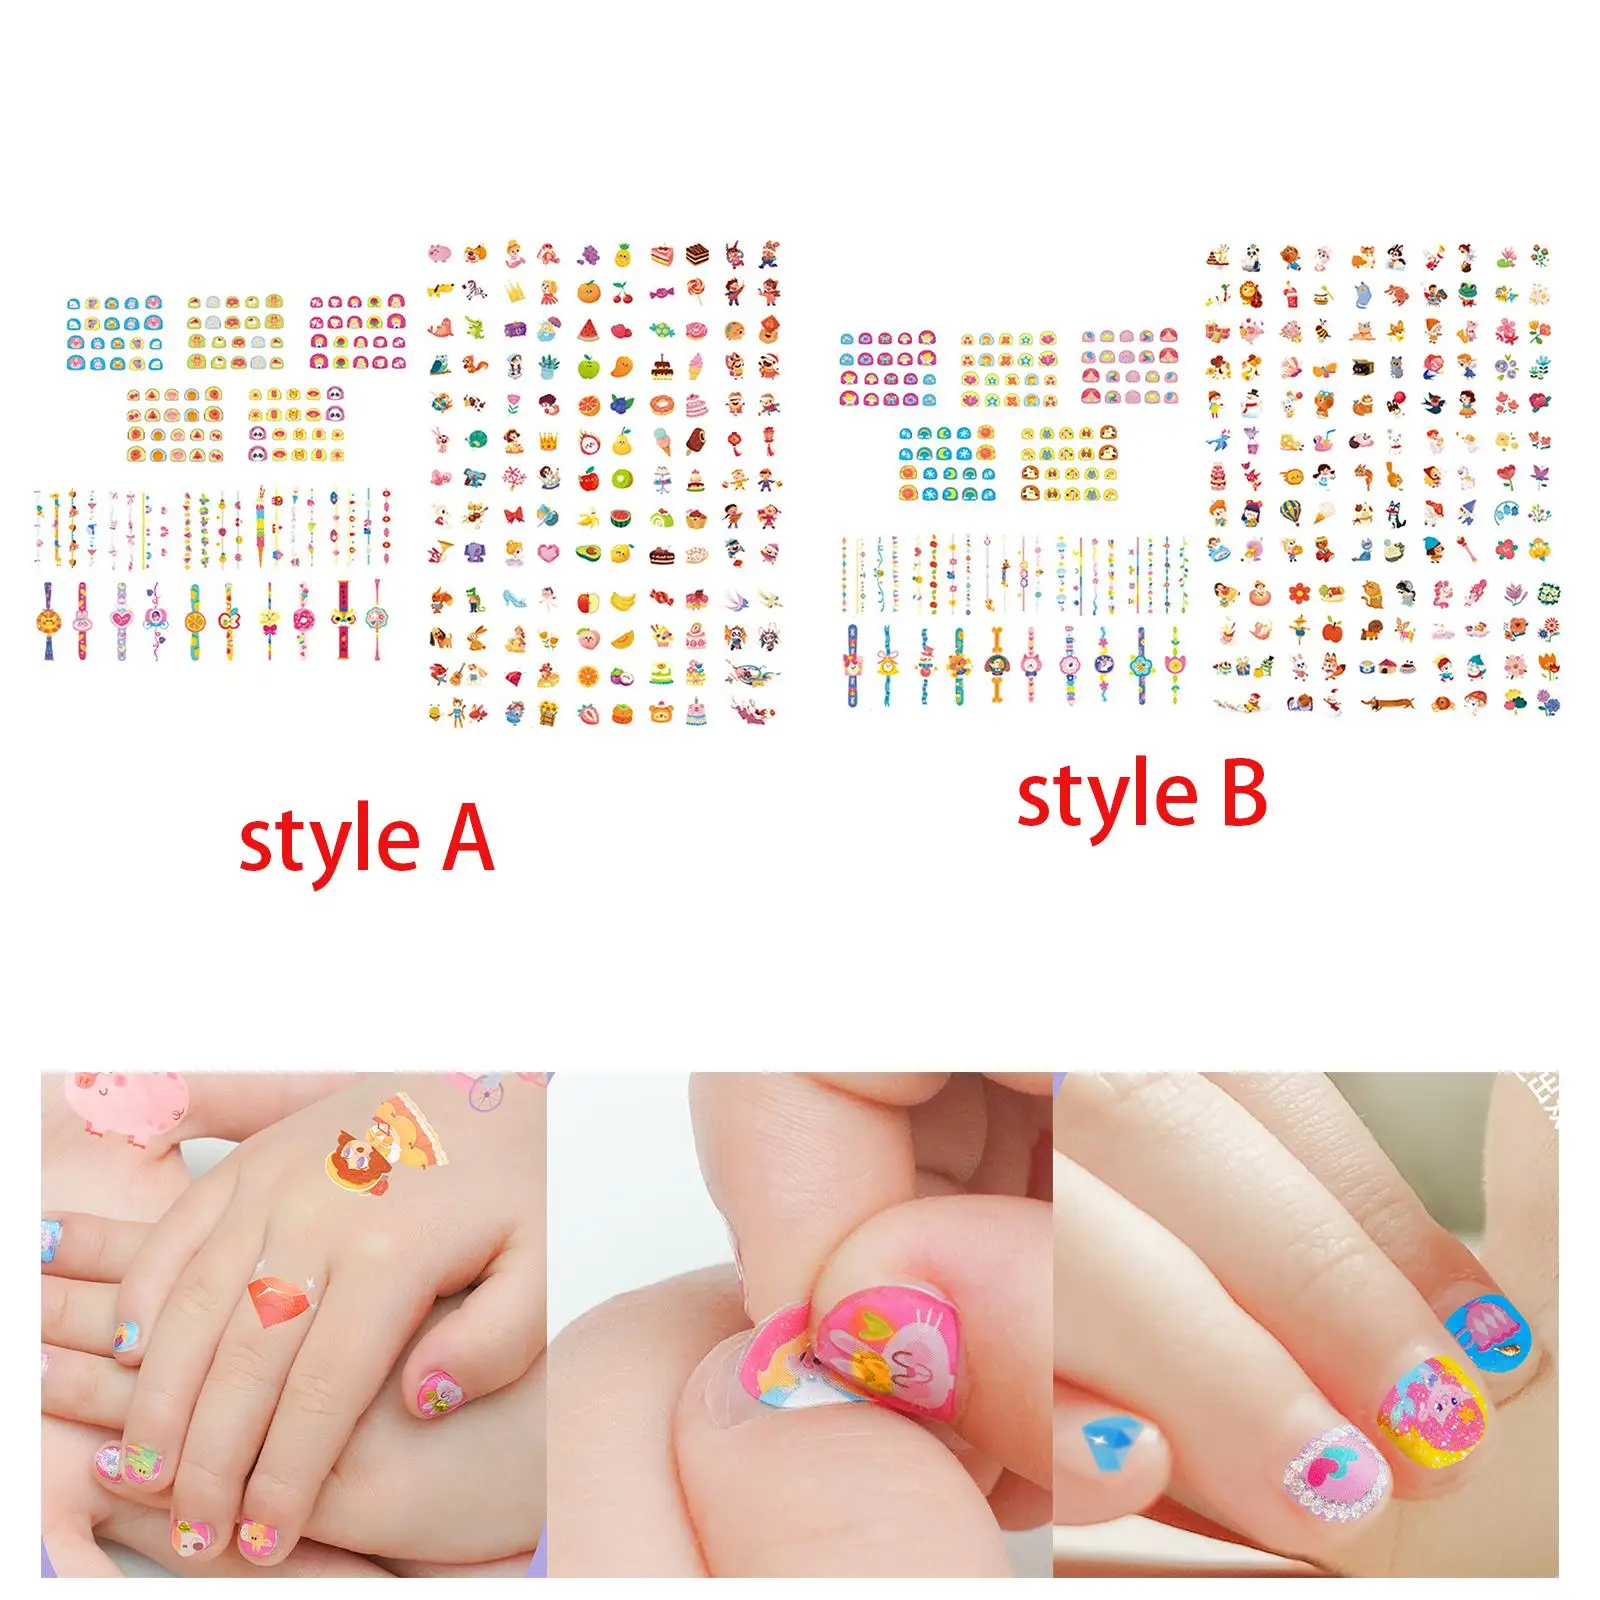 Nail Stickers Stickers Set Decals Cute Manicure Accessories Girls DIY Nail Art Decals Nail Patches for Gifts Party